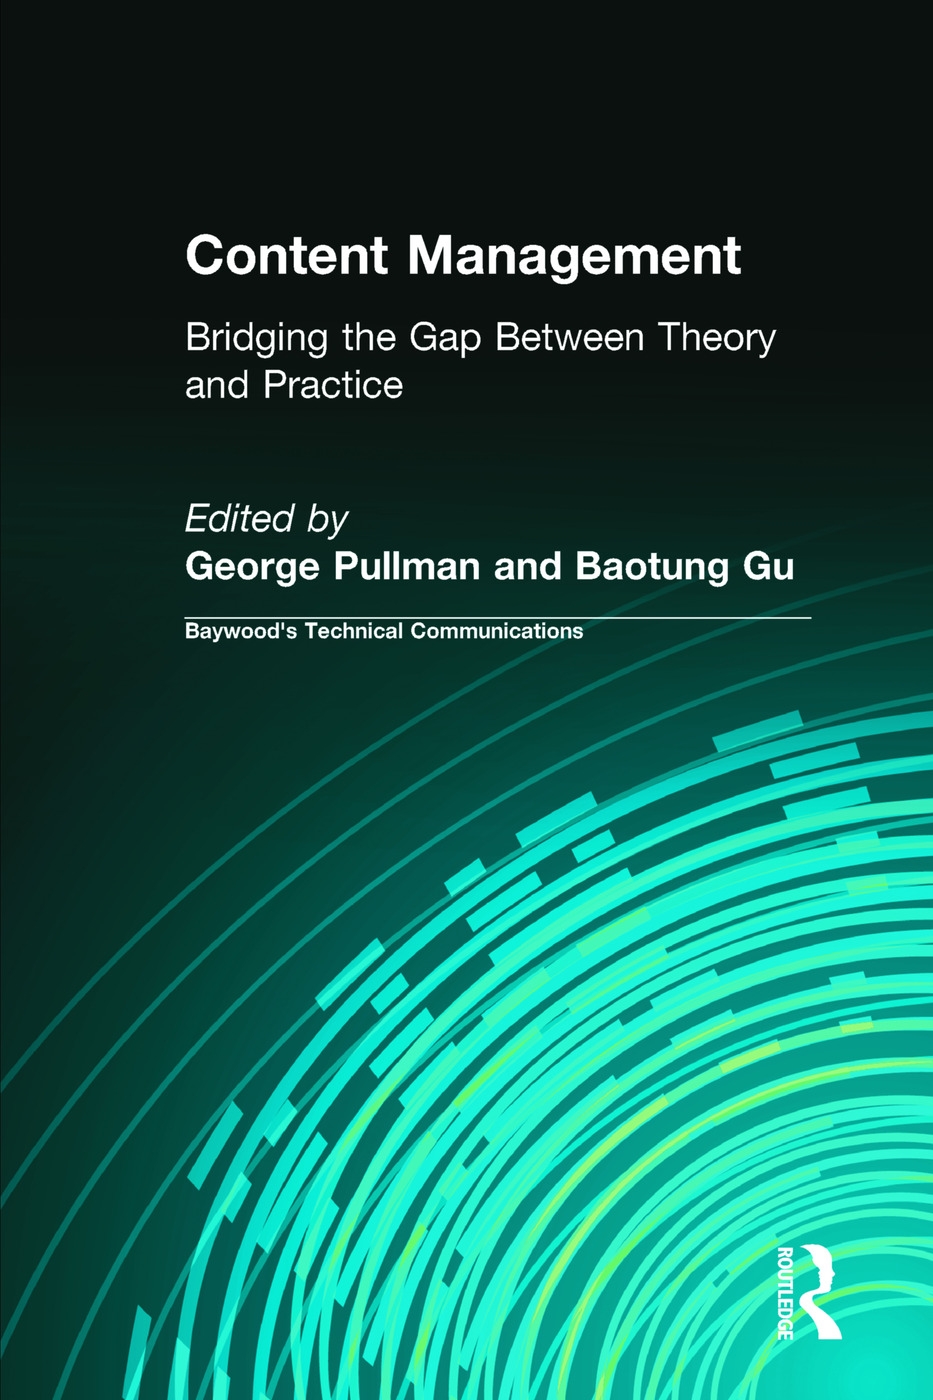 Content Management: Bridging the Gap Between Theory and Practice